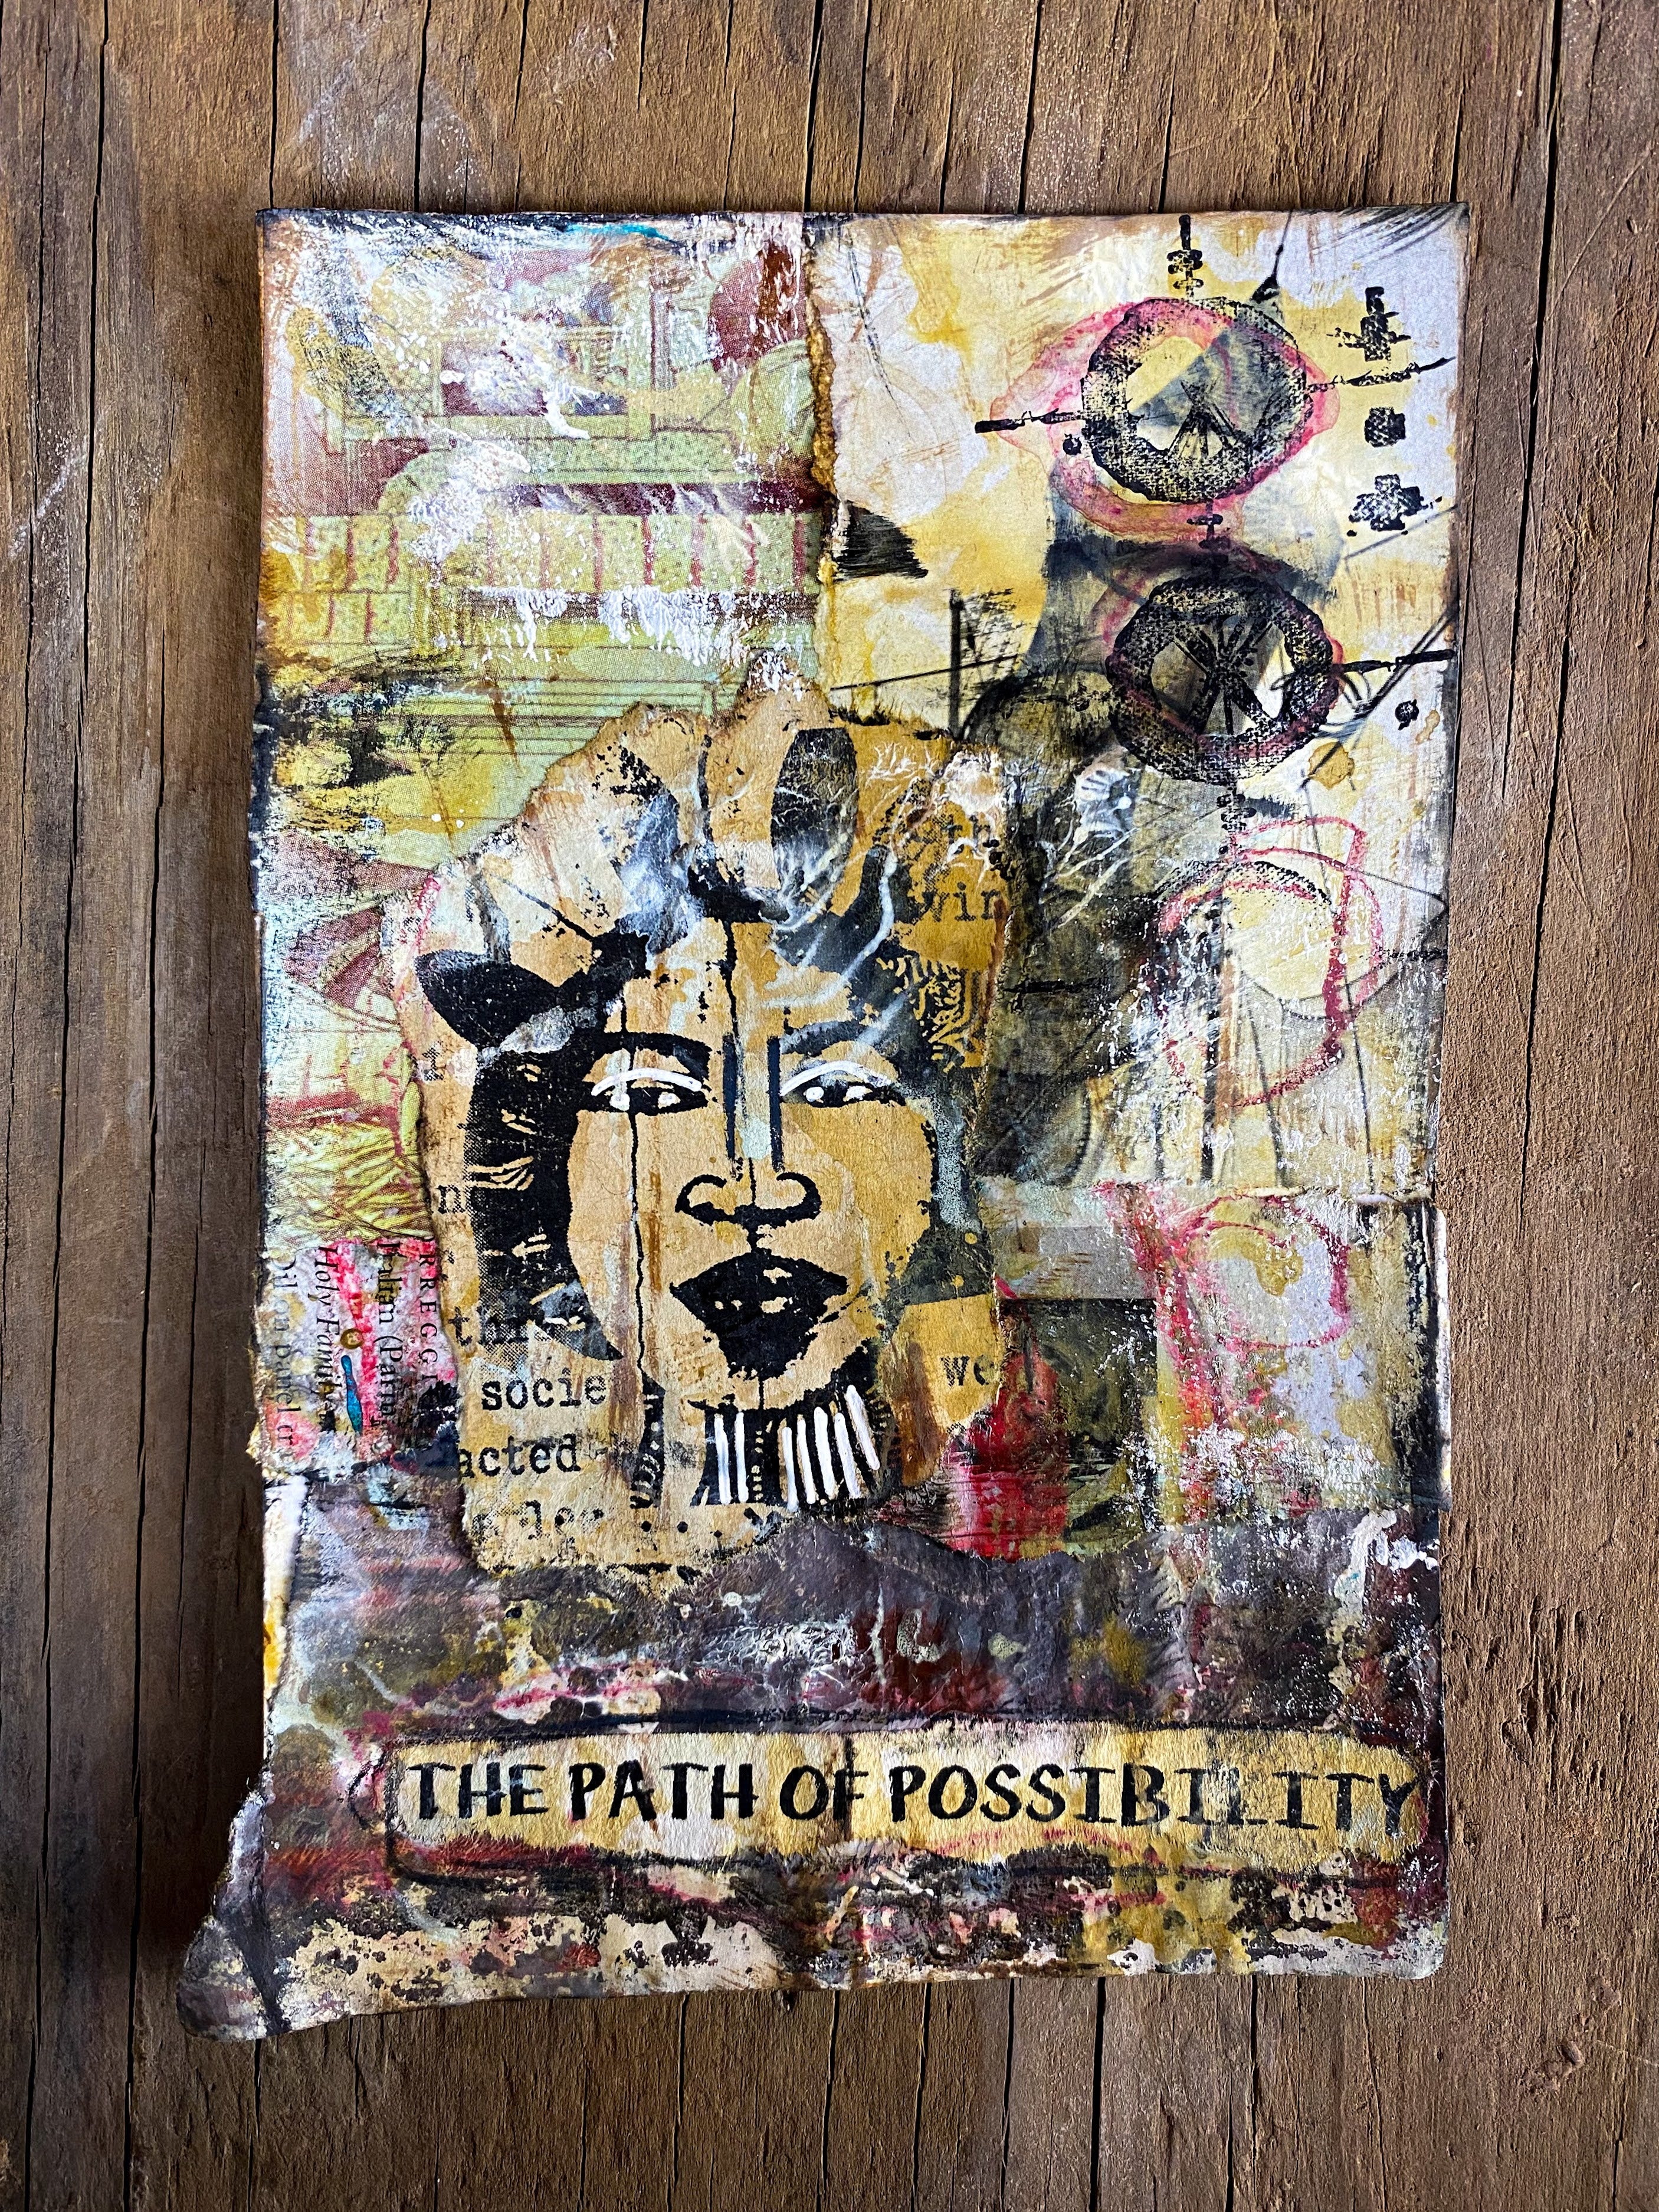 The Path of Possibility- Original Mixed Media Collage